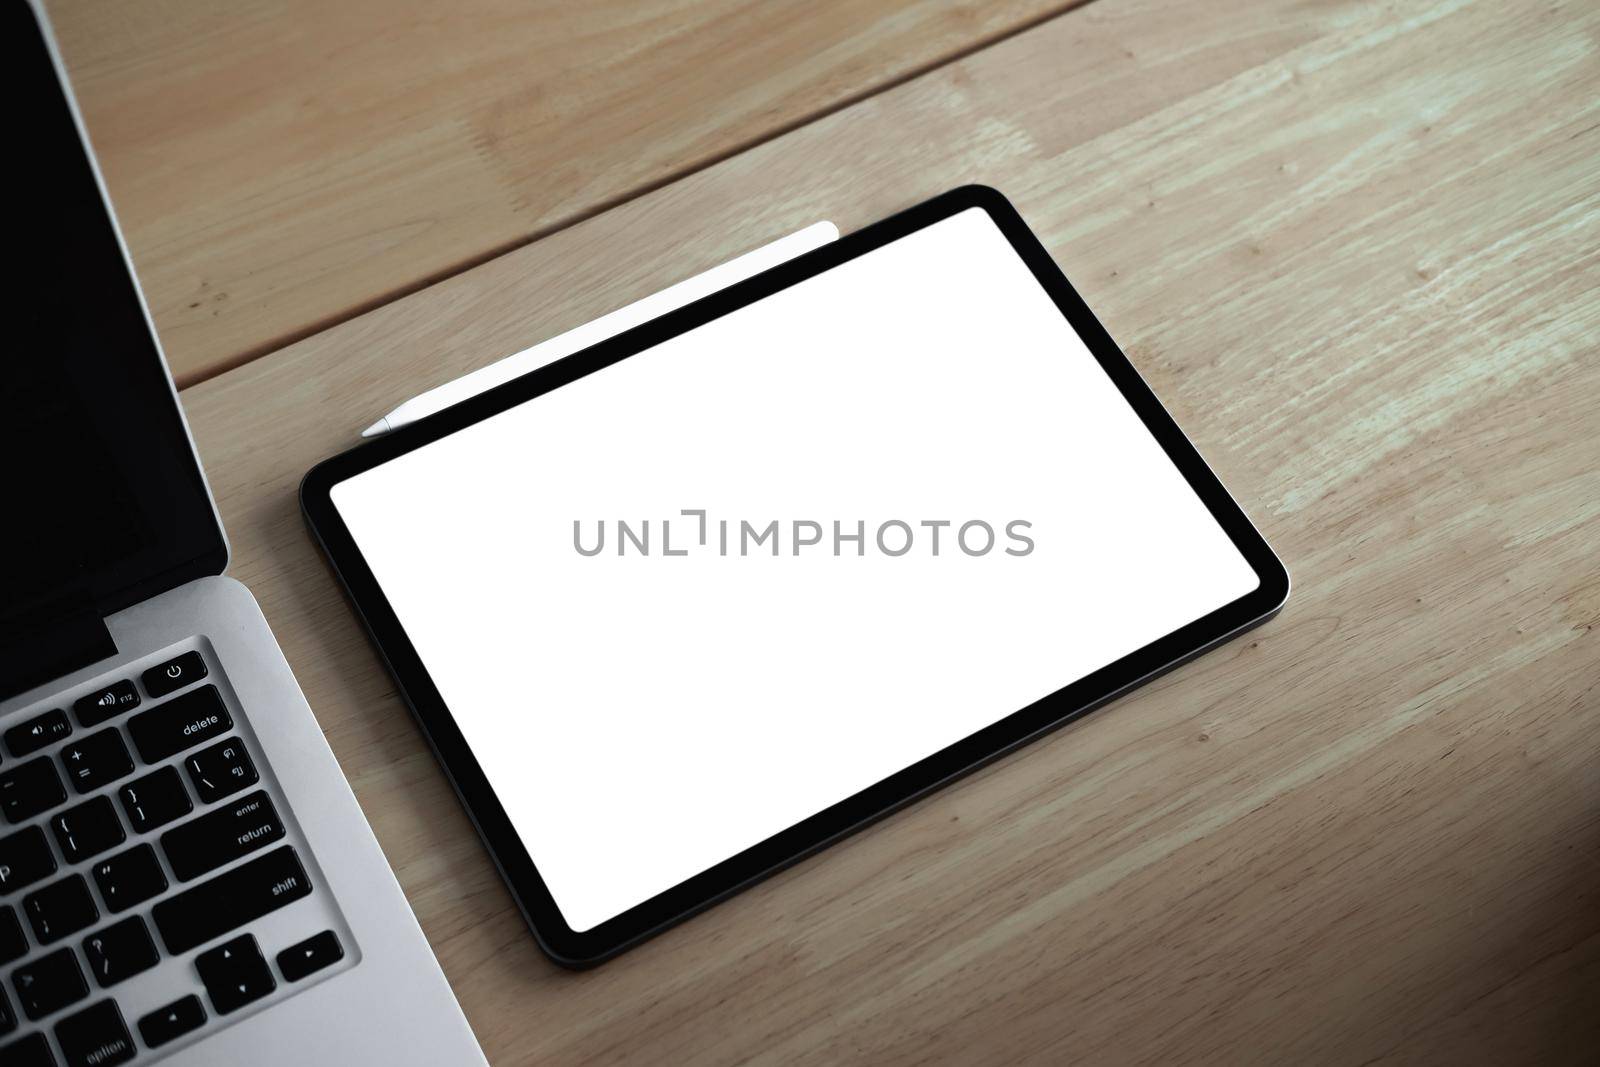 Cropped shot of mock-up digital tablet with blank white screen on desk